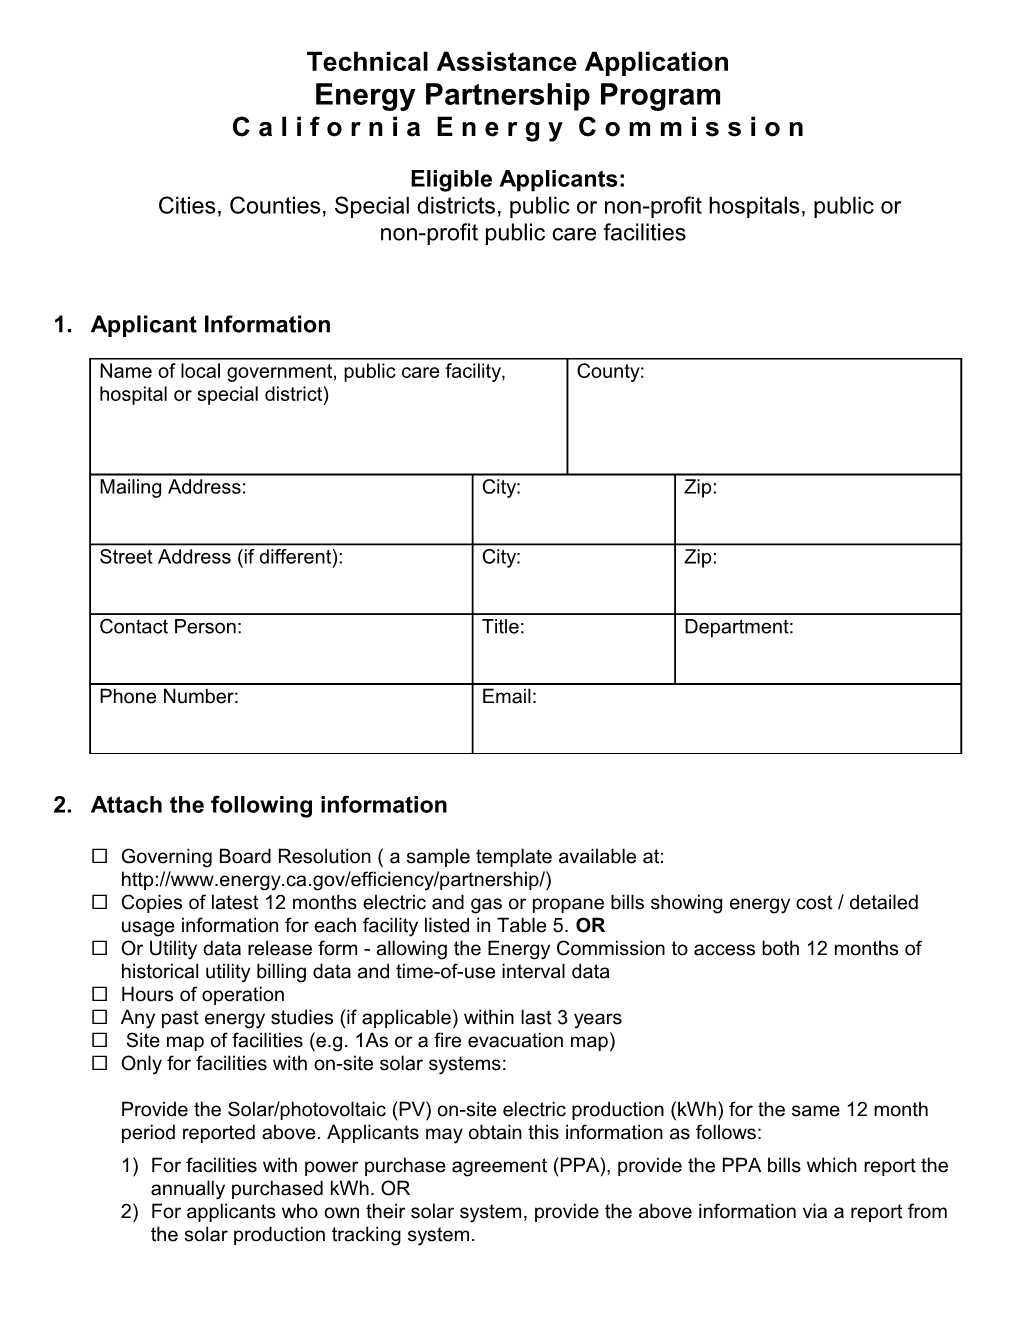 Technical Assistance Application